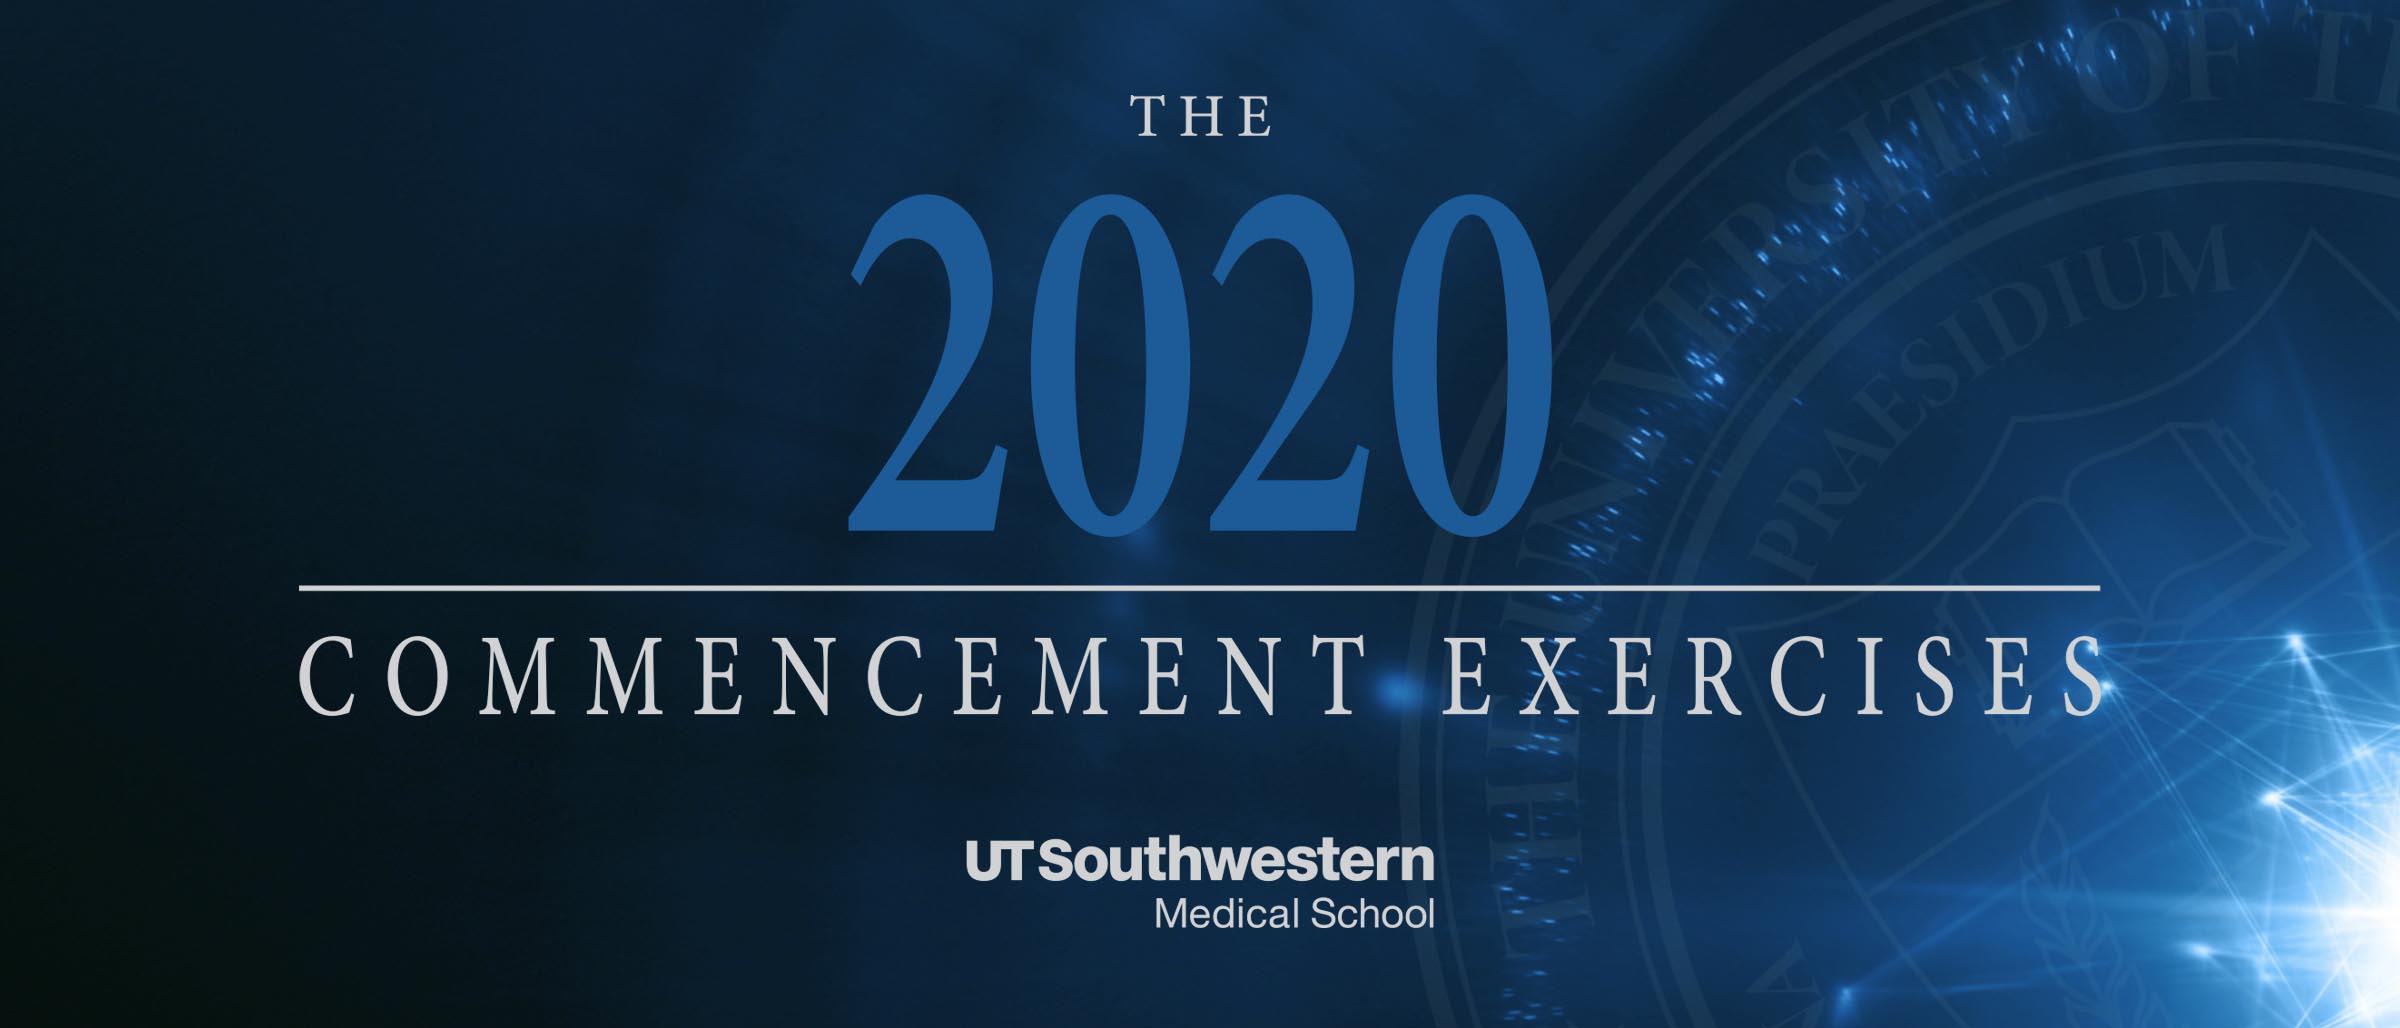 The 2020 Commencement Exercises